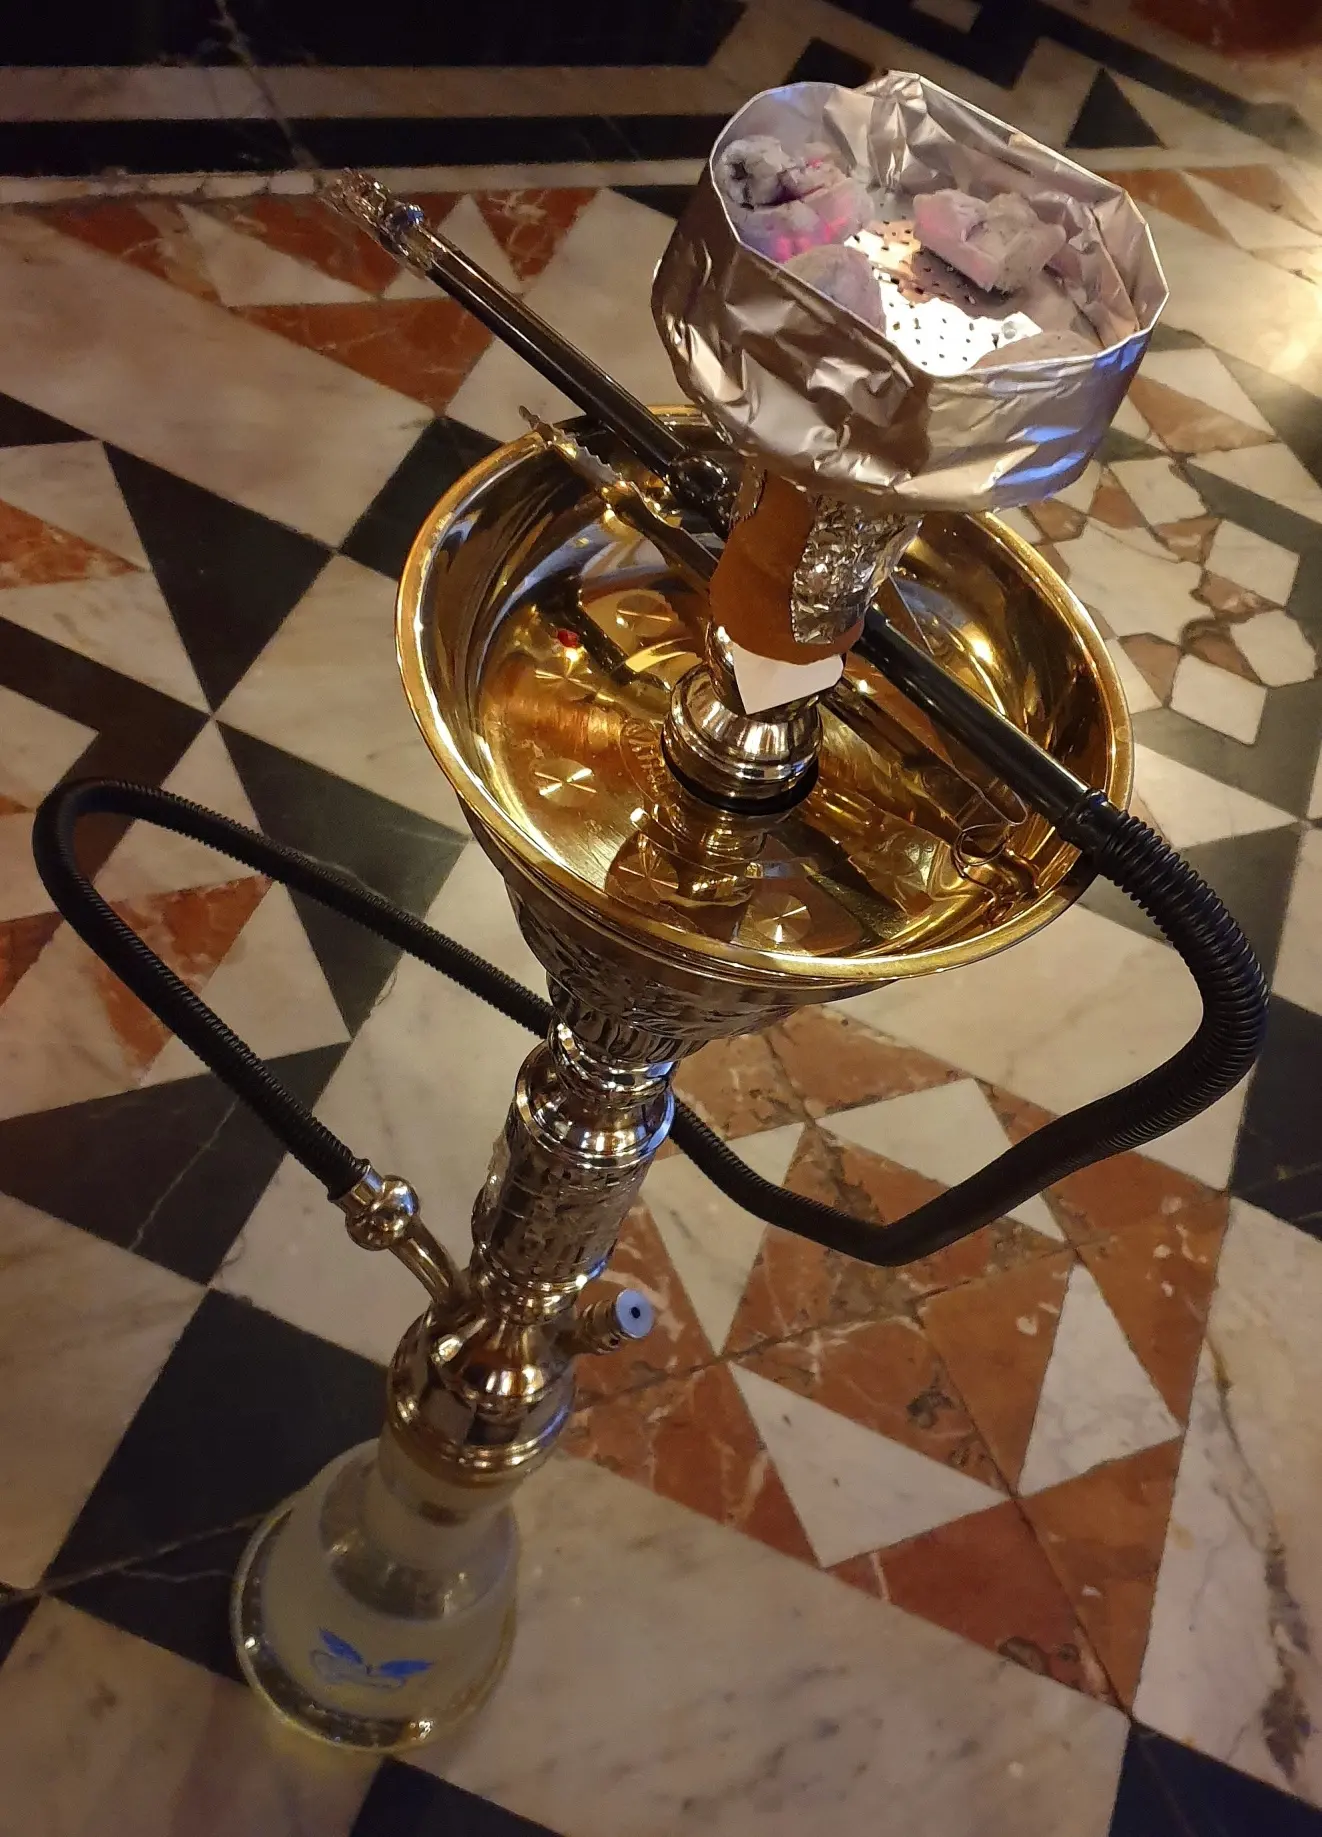 A hookah, also known as a shisha or a waterpipe, utilises water filtration and is frequently used to smoke tobacco mixed with flavouring, fruit or other ingredients. I used this particular device in a restaurant in the middle-east